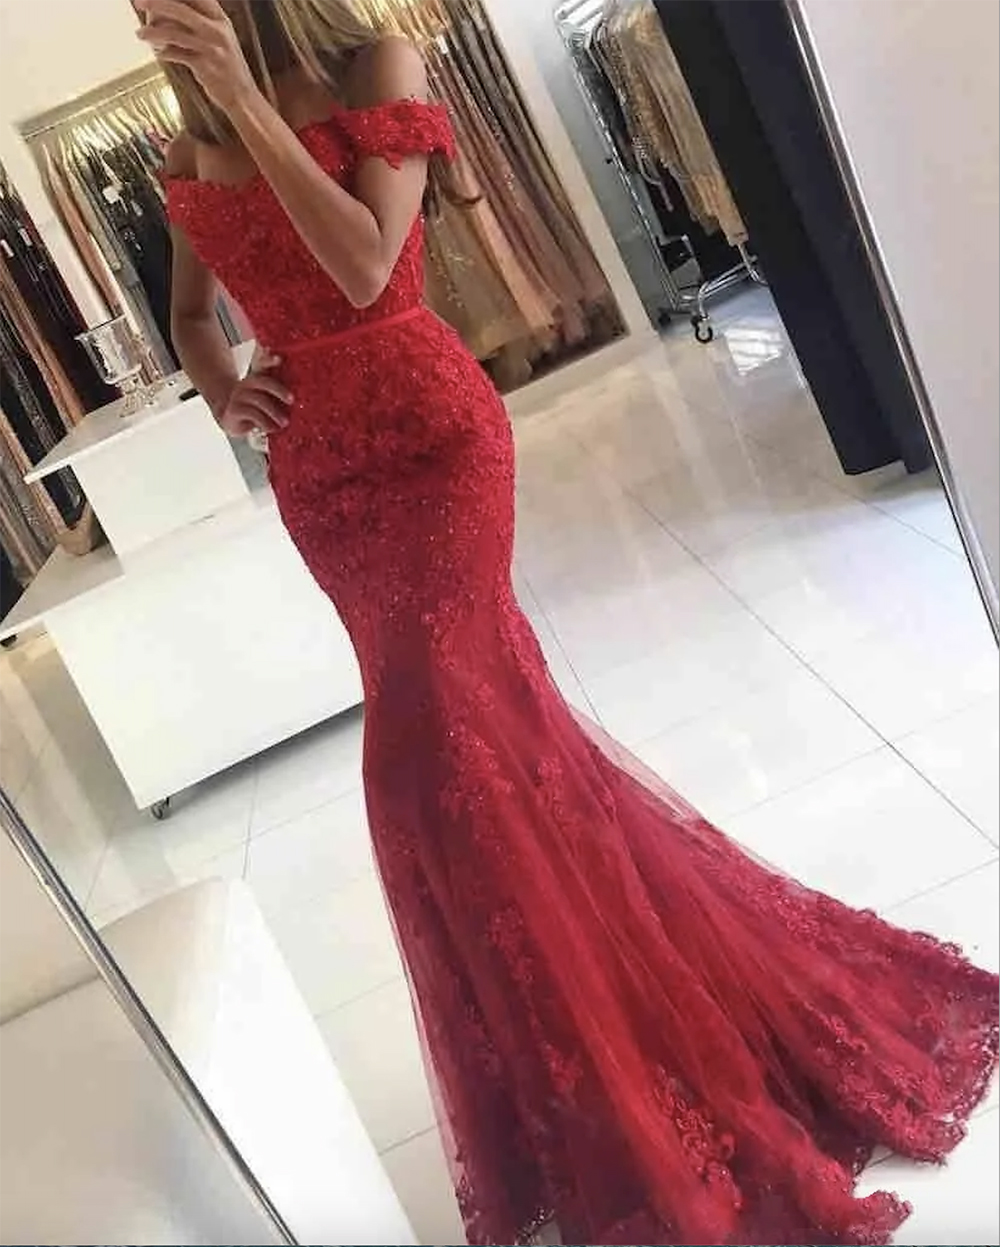 2024 Burgundy Bridesmaid Dresses New Cheap For Weddings Mermaid Off Shoulder Lace Appliques Beaded Party Dress Plus Size Maid of Honor Gowns